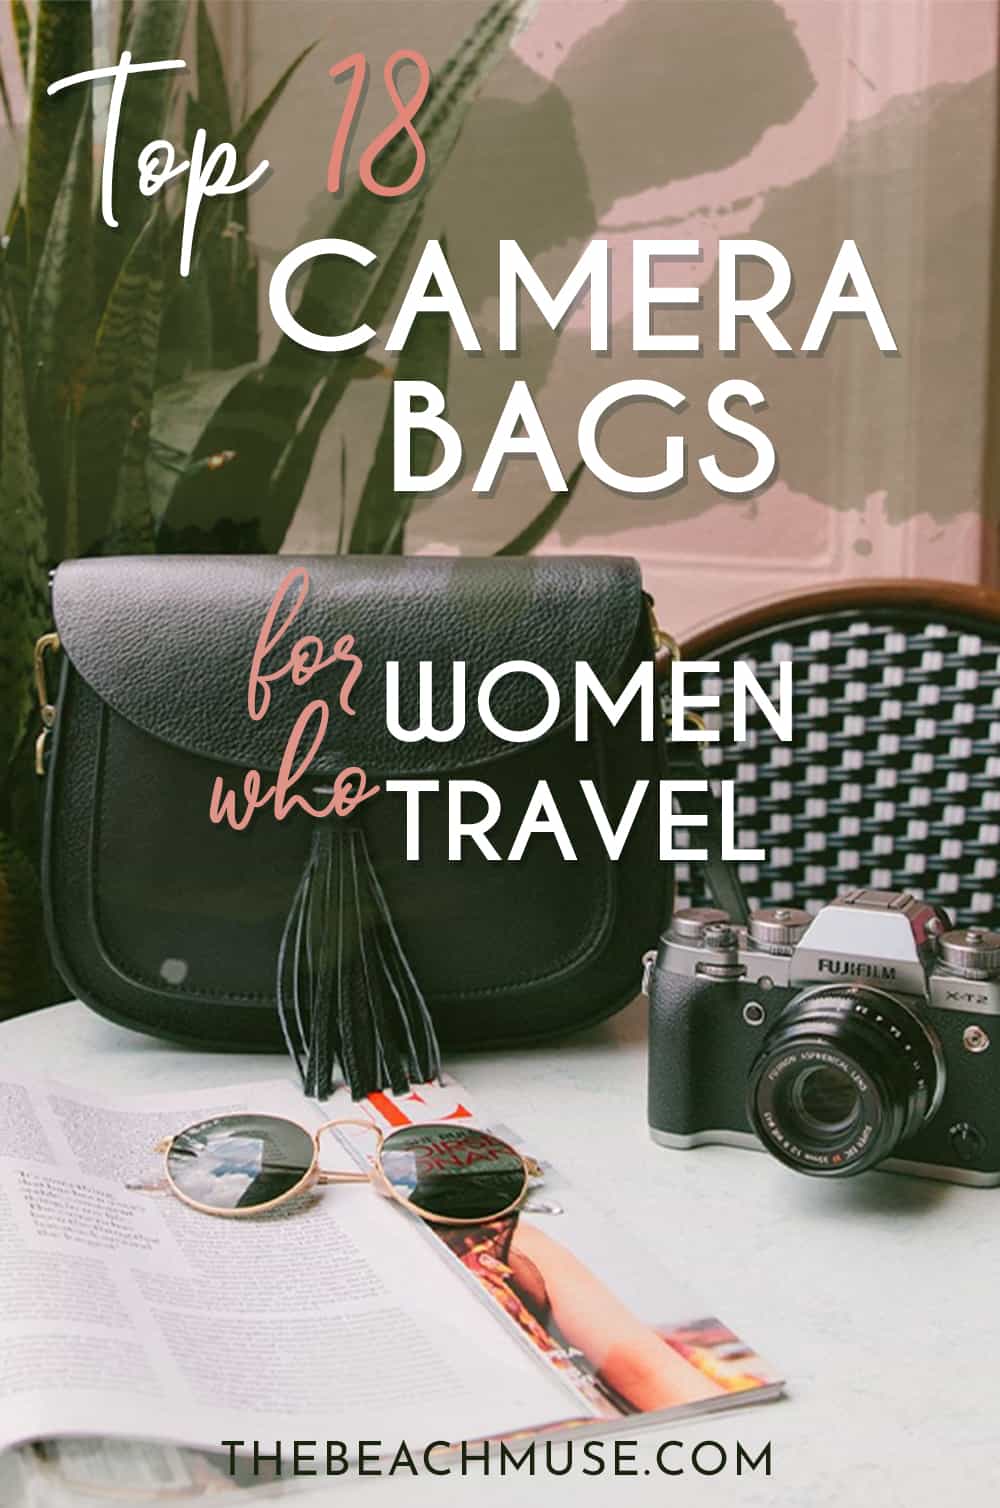 TOP 18 camera bags for women who travel